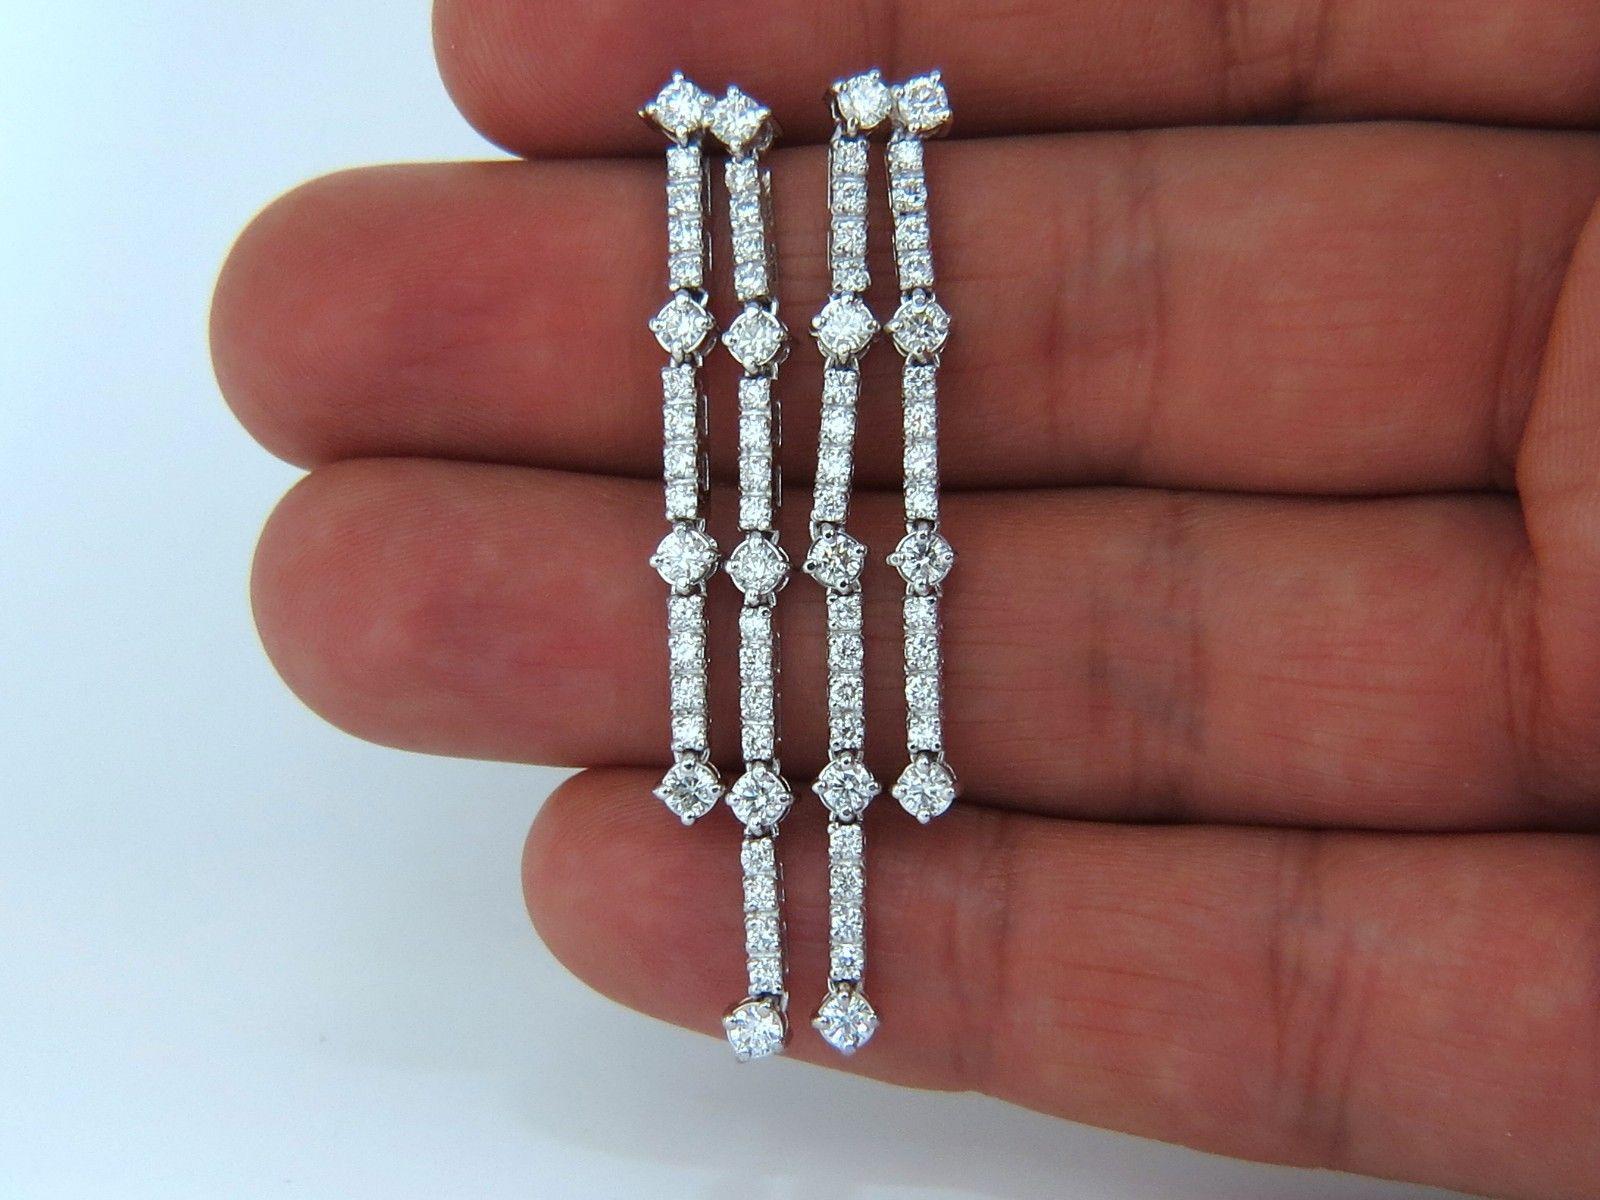 Two Rowed, Five Tiered Dangles

2.33ct. Natural diamonds  earrings.

Rounds, Full cut brilliants.

G- color Vs-2 Clarity. 

Excellent detail.

14kt. white gold

7.9 grams.

Butterfly, Comfortable push backs 

$8,000 Appraisal Certificate will